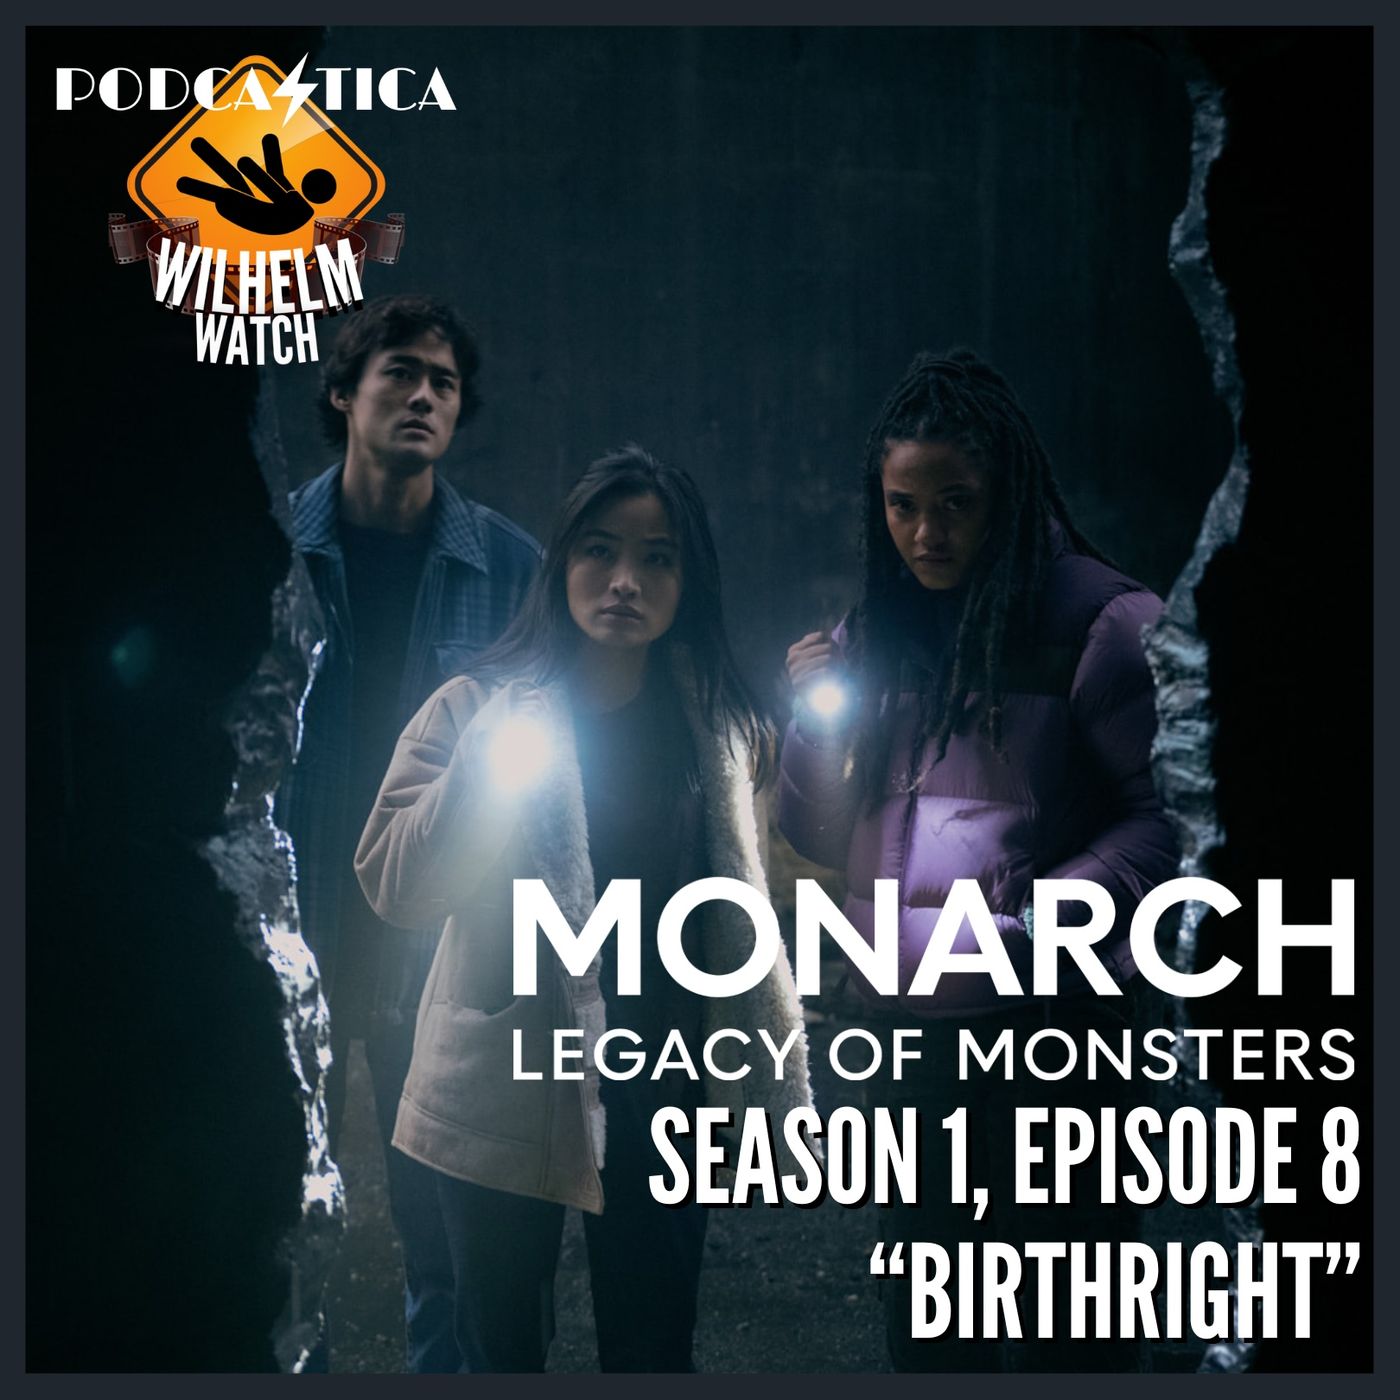 ”Birthright” (Monarch: Legacy of Monsters S1E8)